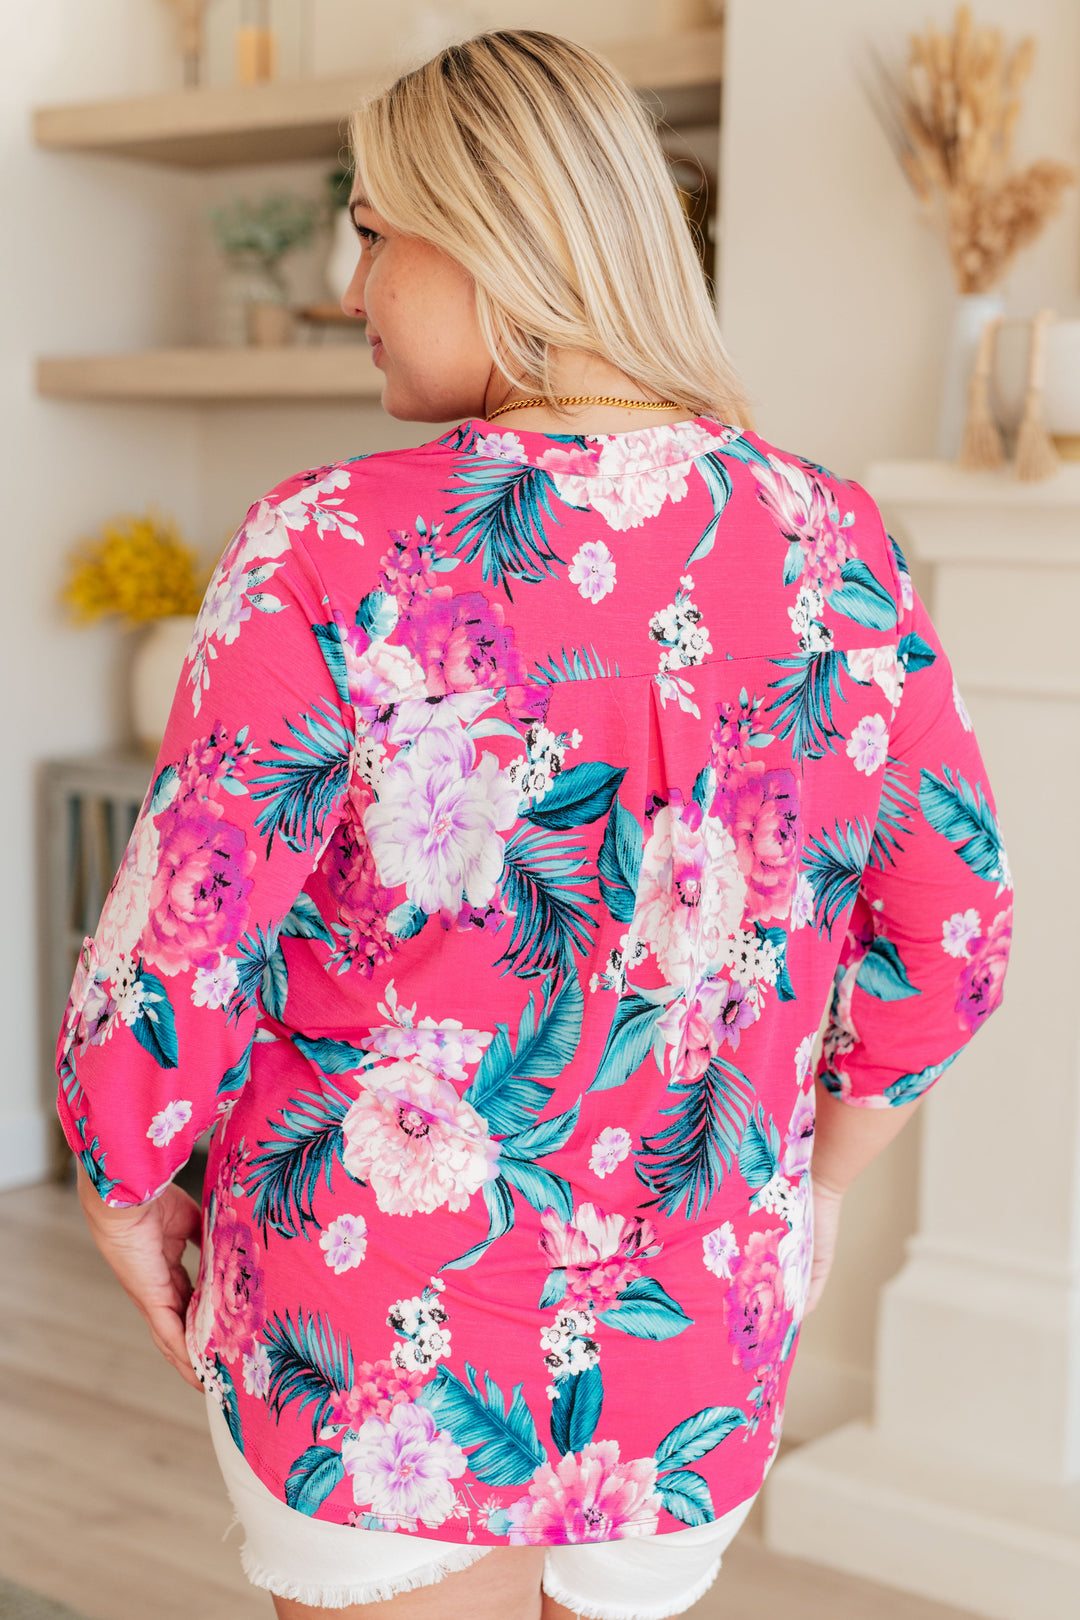 Dear Scarlett Lizzy Top in Magenta and Teal Tropical Floral